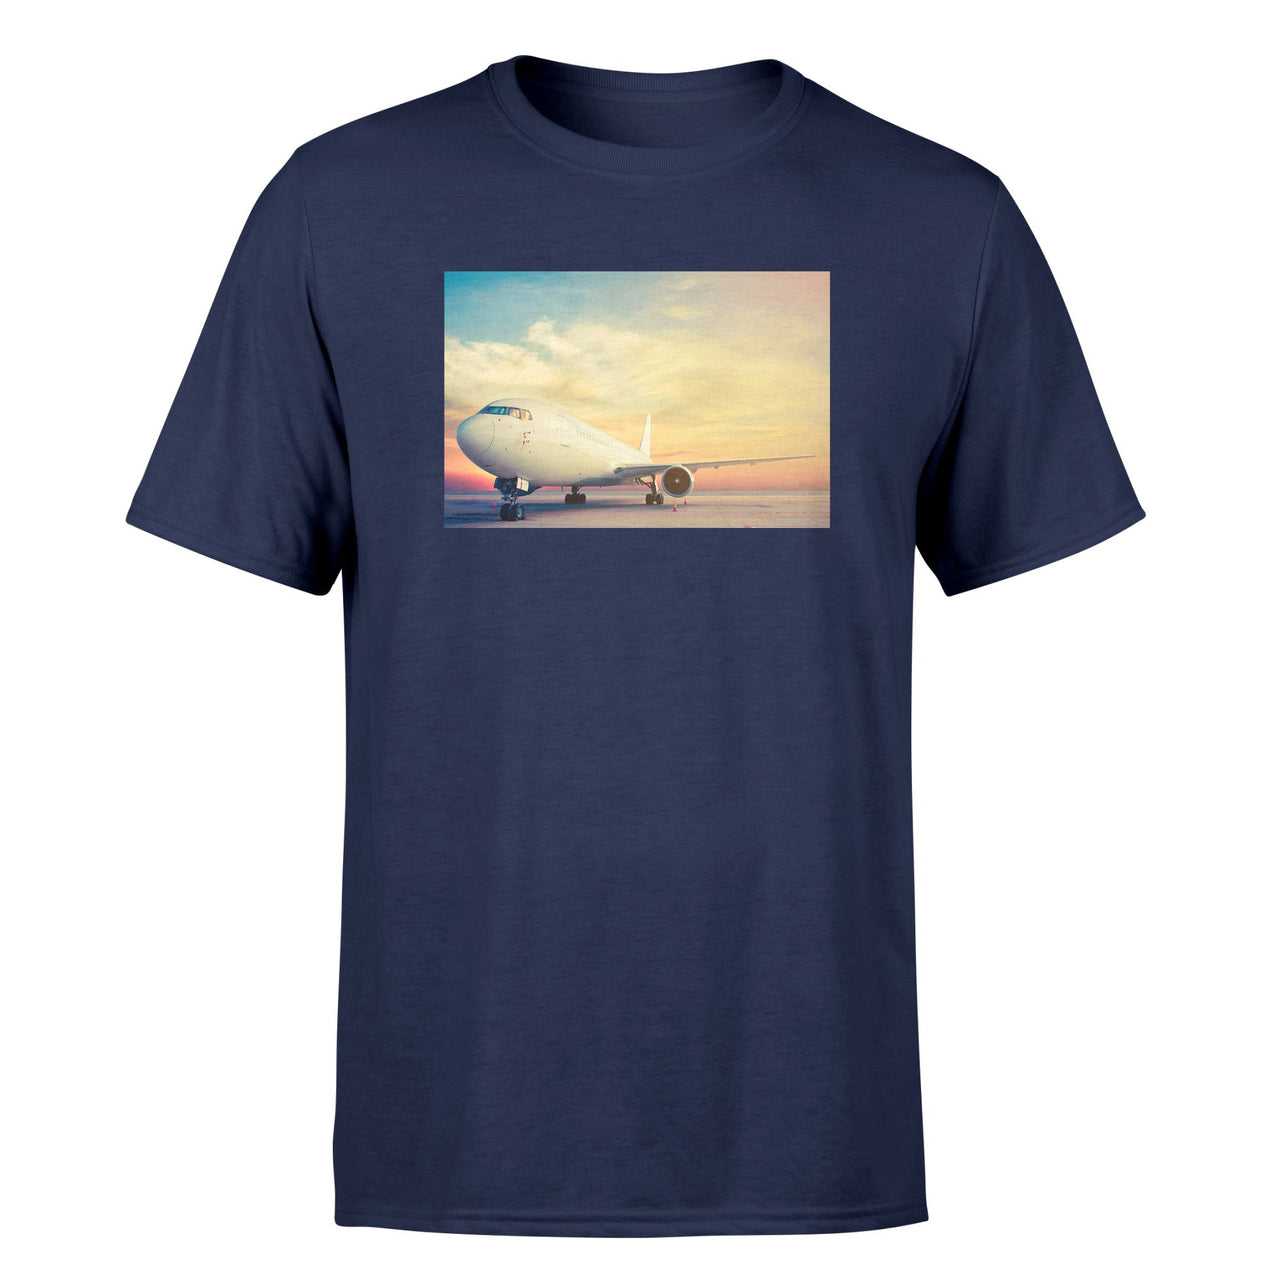 Parked Aircraft During Sunset Designed T-Shirts